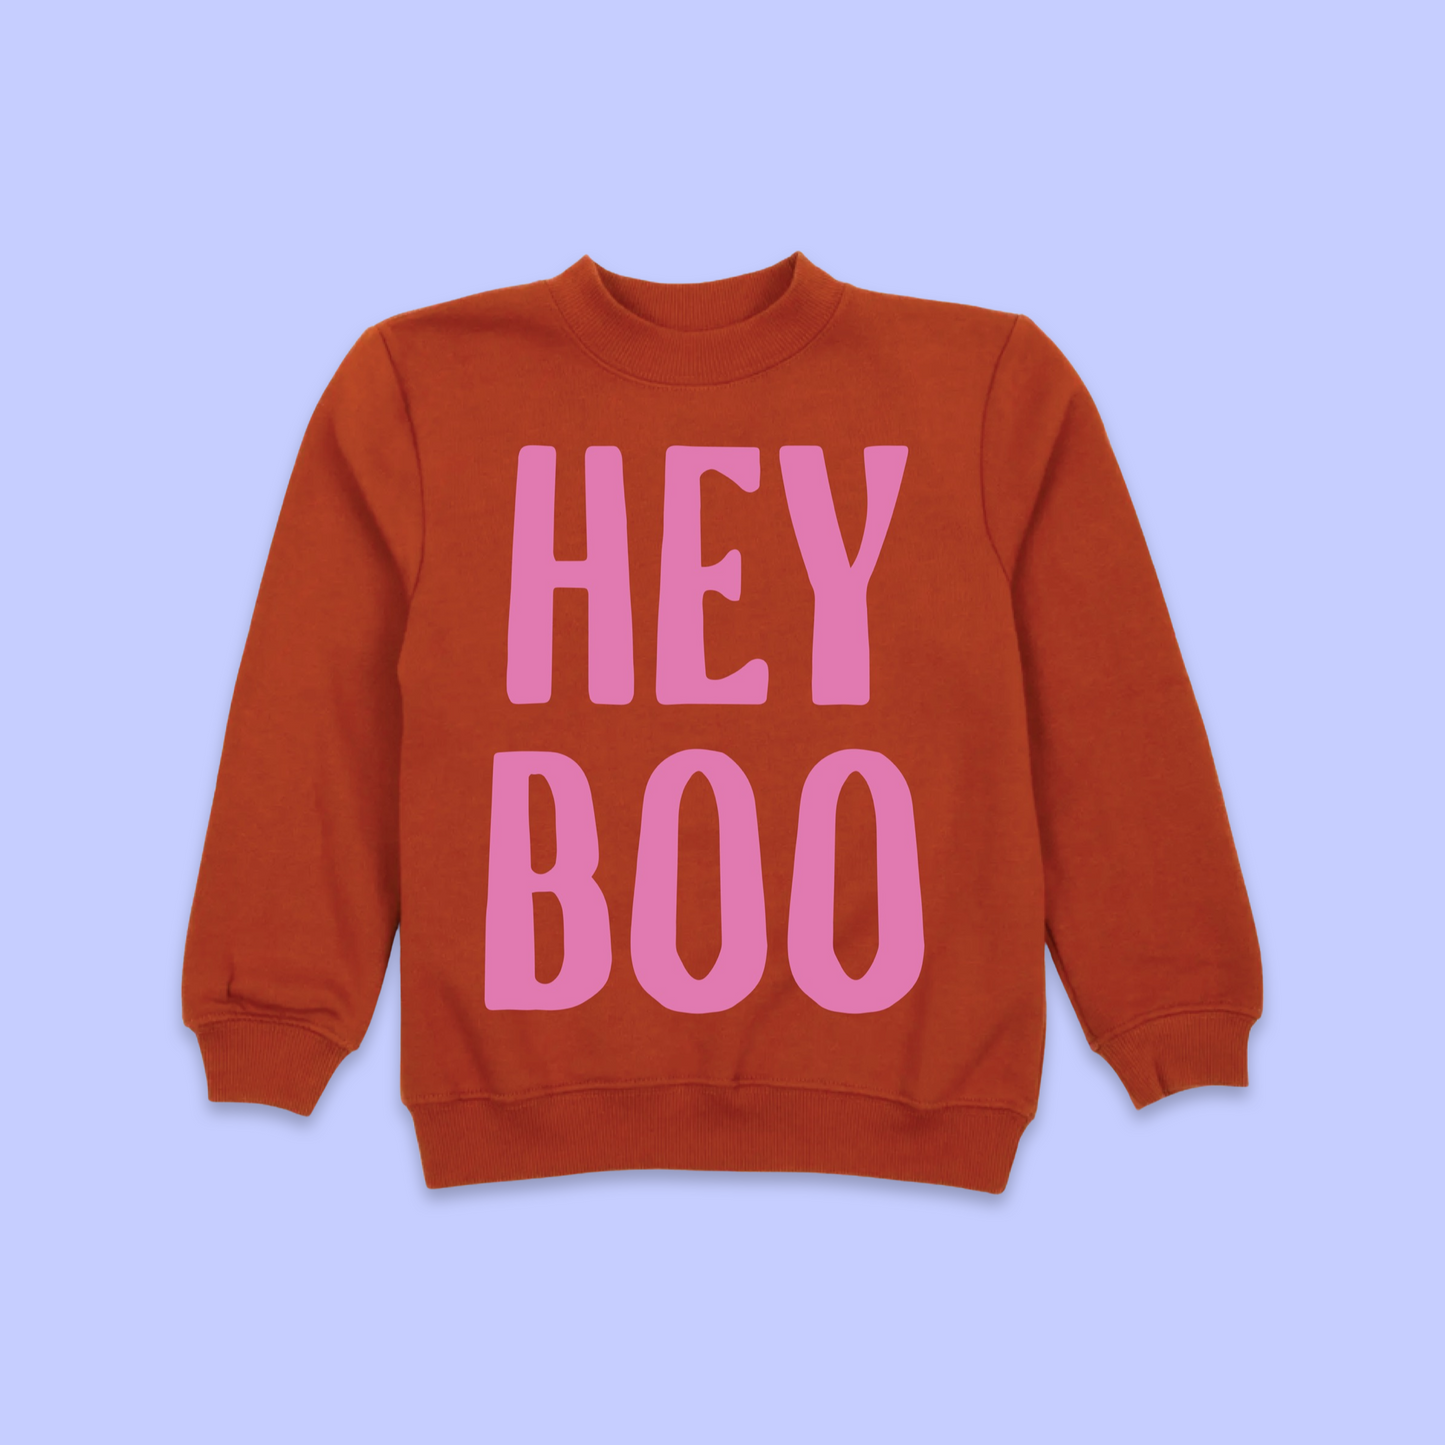 Hey Boo Kids Pullover - Rust/Pink